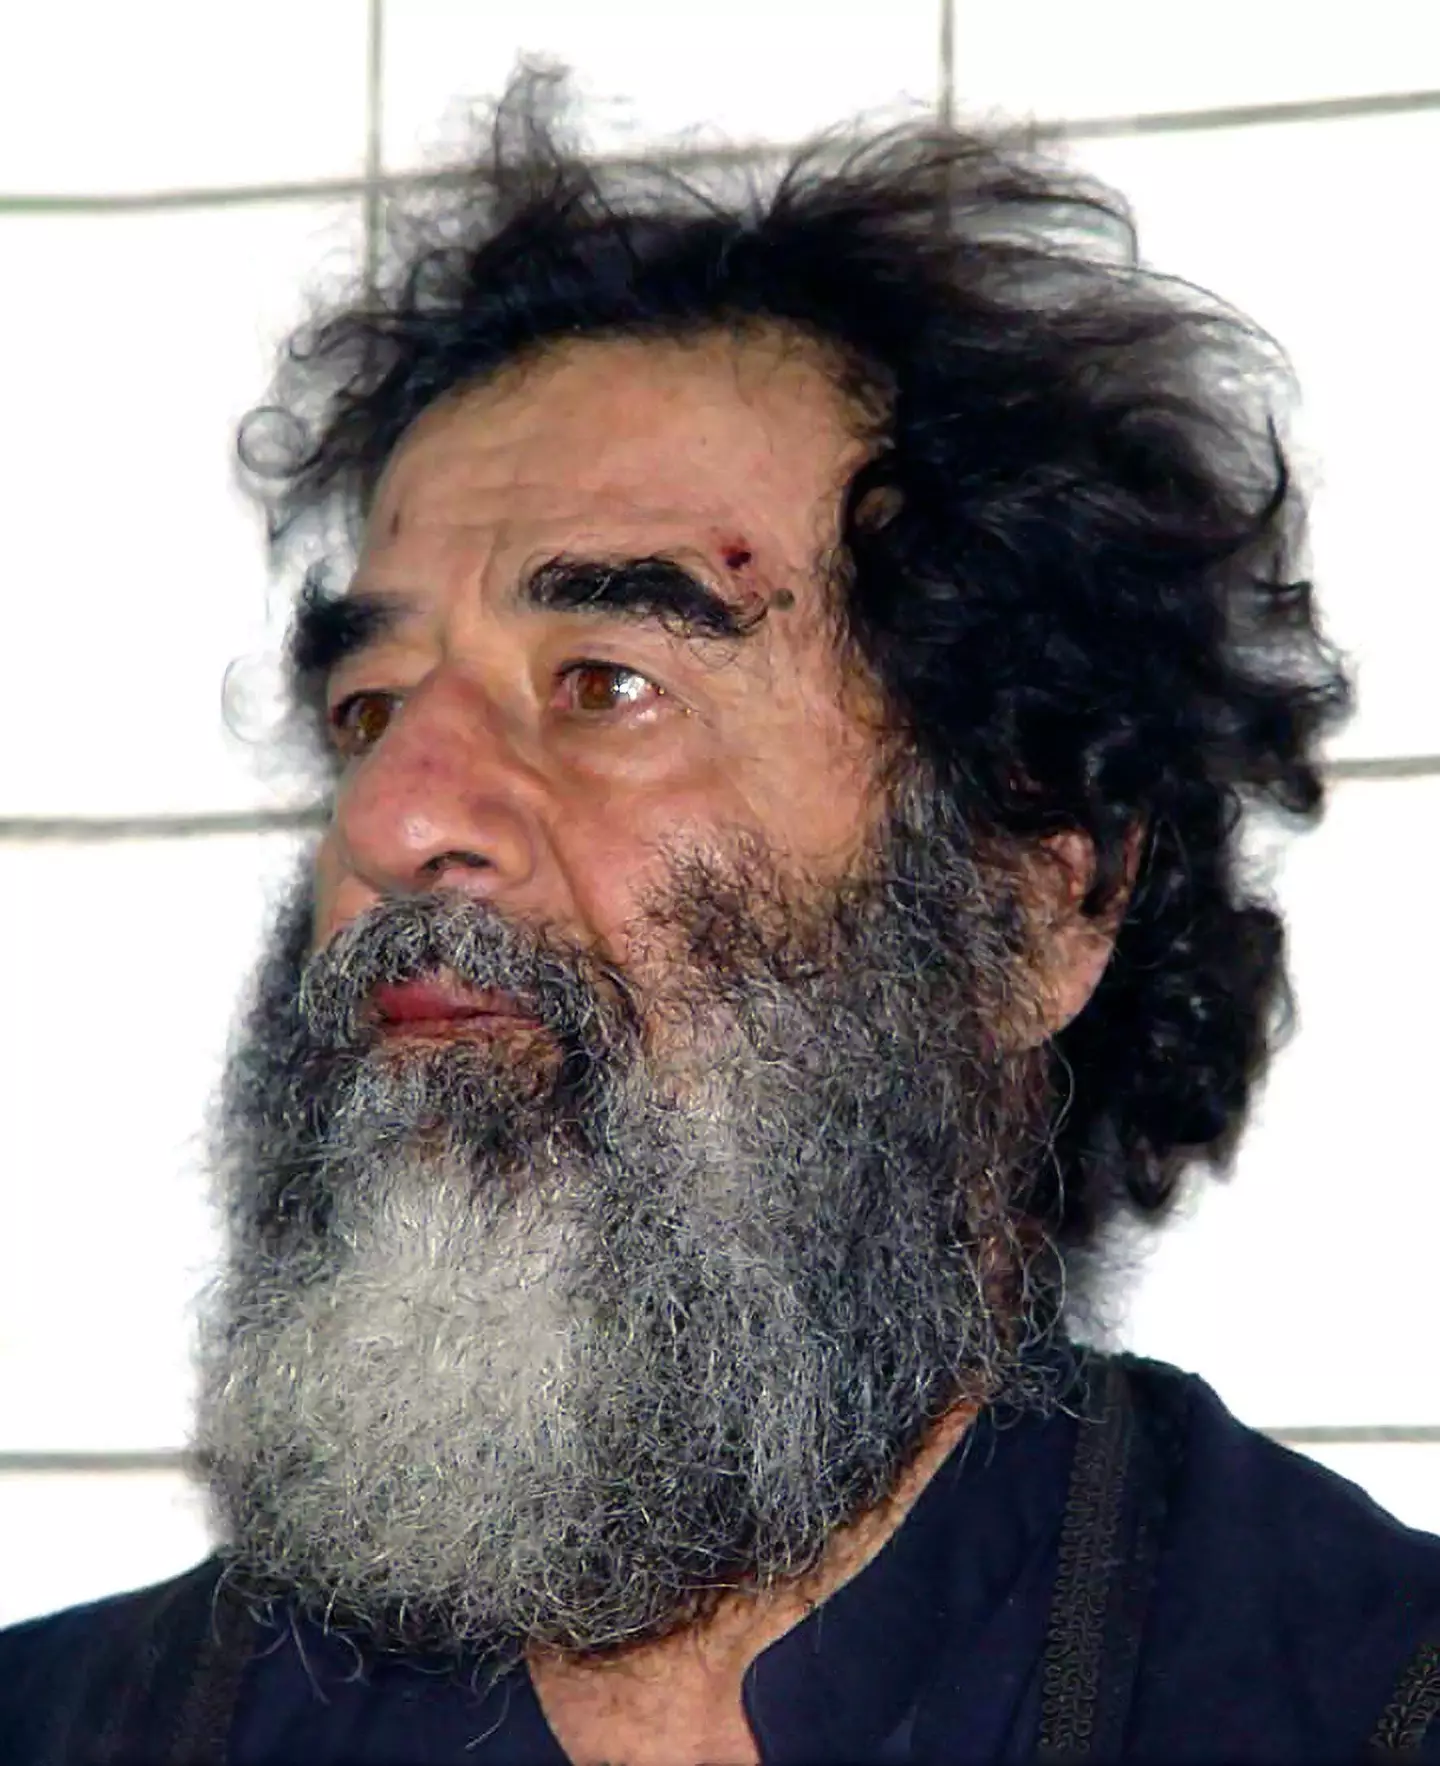 Saddam Hussein after being apprehended by US forces following the toppling of his regime.